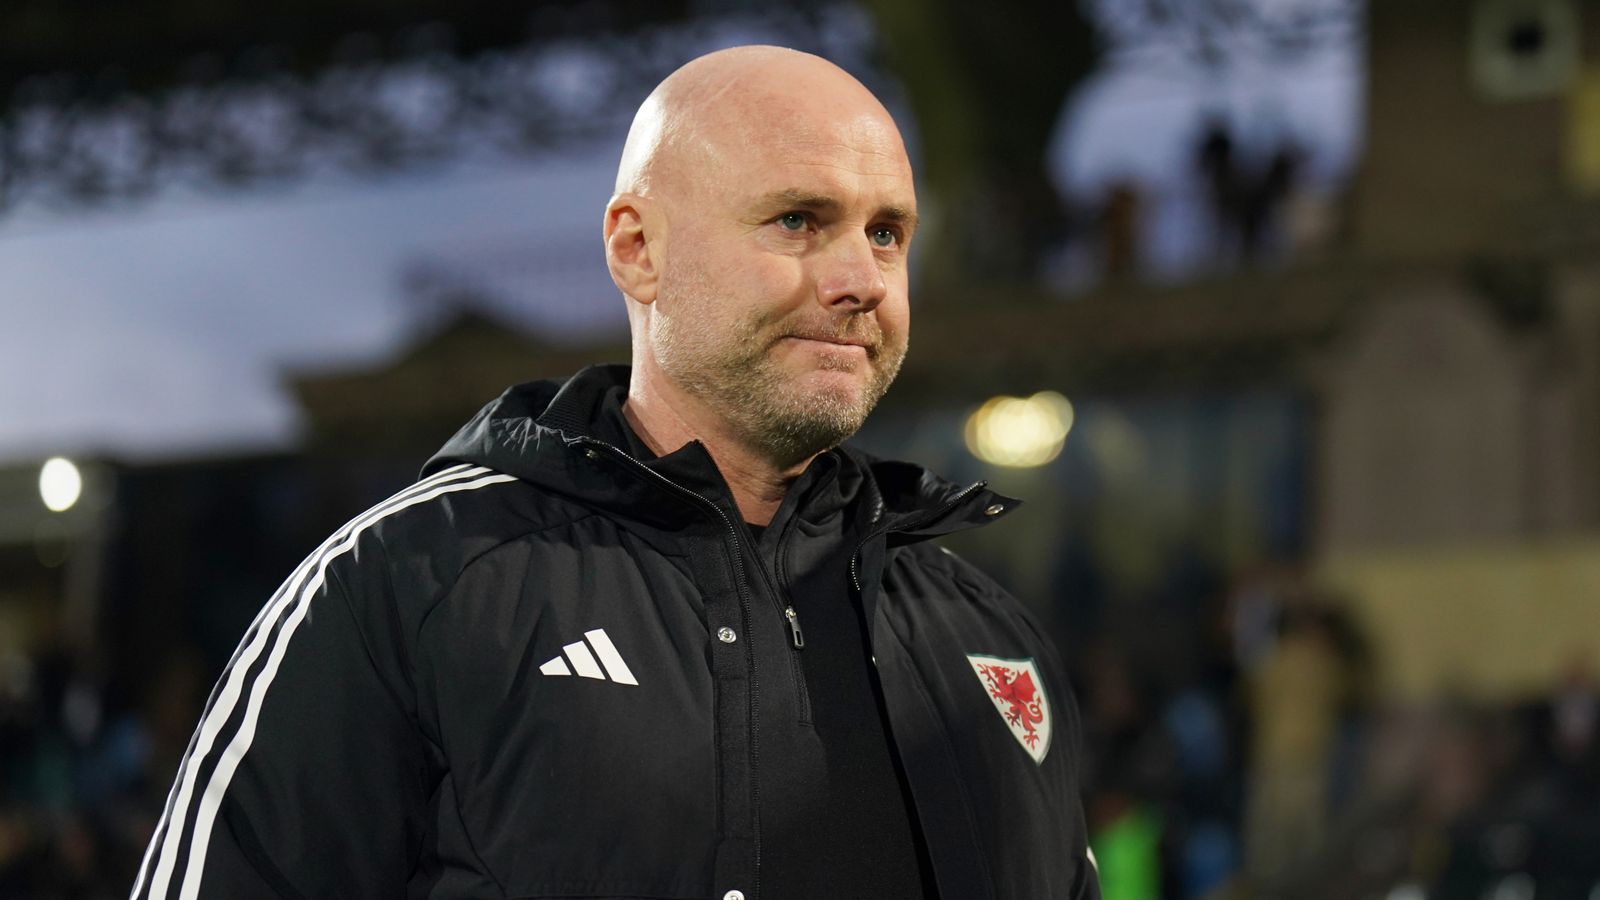 Rob Page exclusive: Wales sacking hurt, but it was not a surprise... FAW must now stick to long-term plan of developing next generation after Gareth Bale era